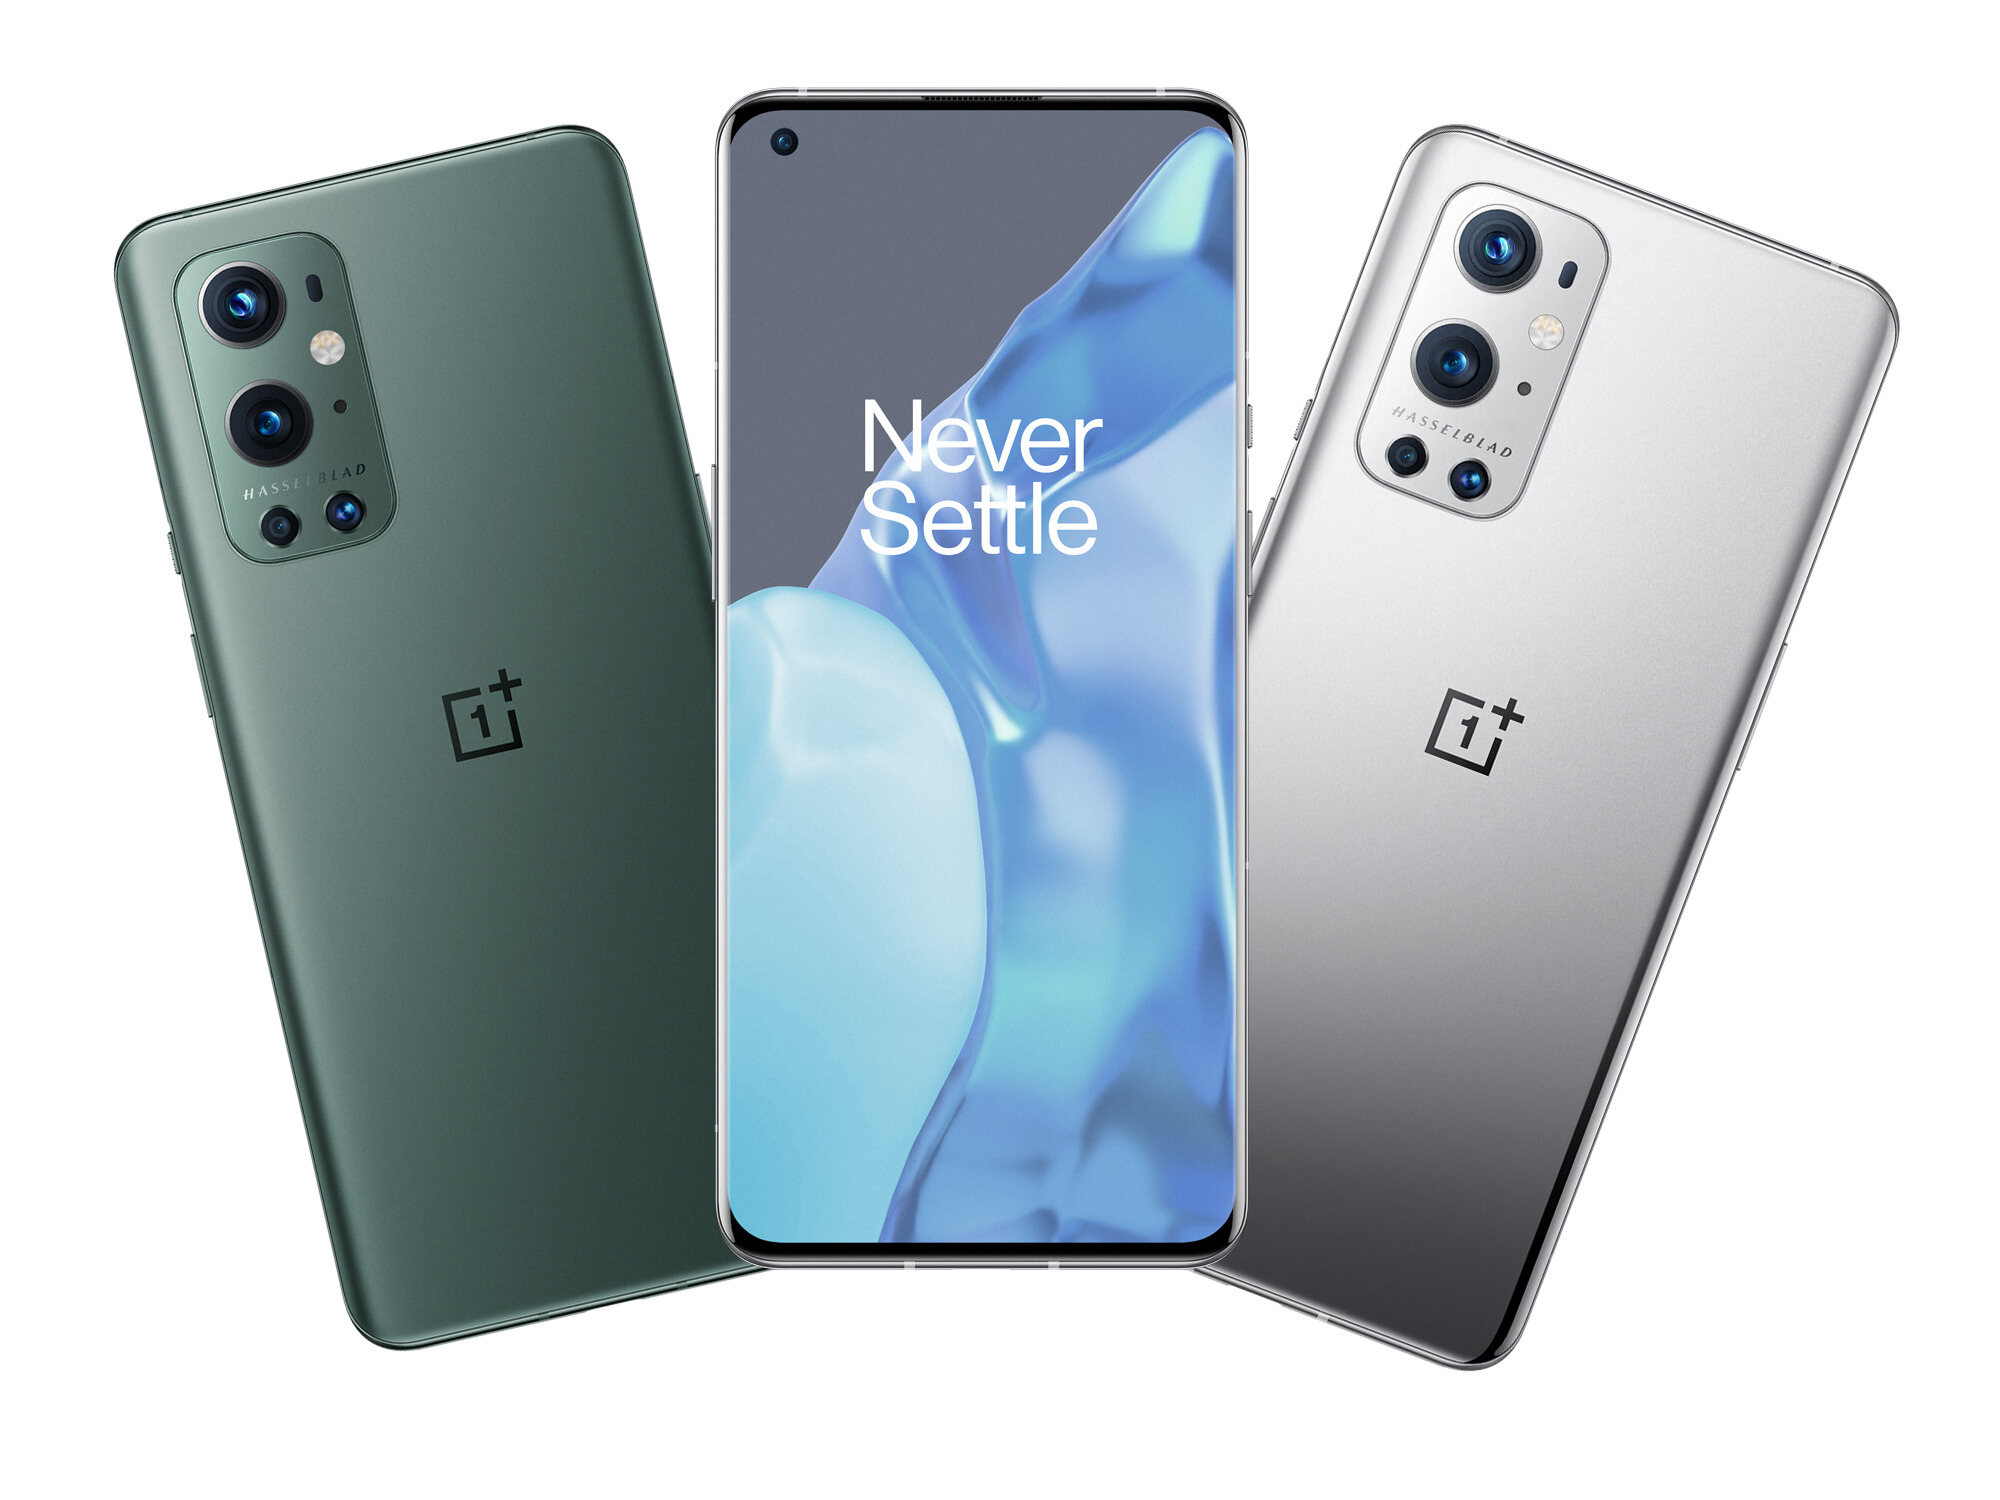 oneplus-wont-be-first-with-snapdragon-855-5g-phone-may-cost-850